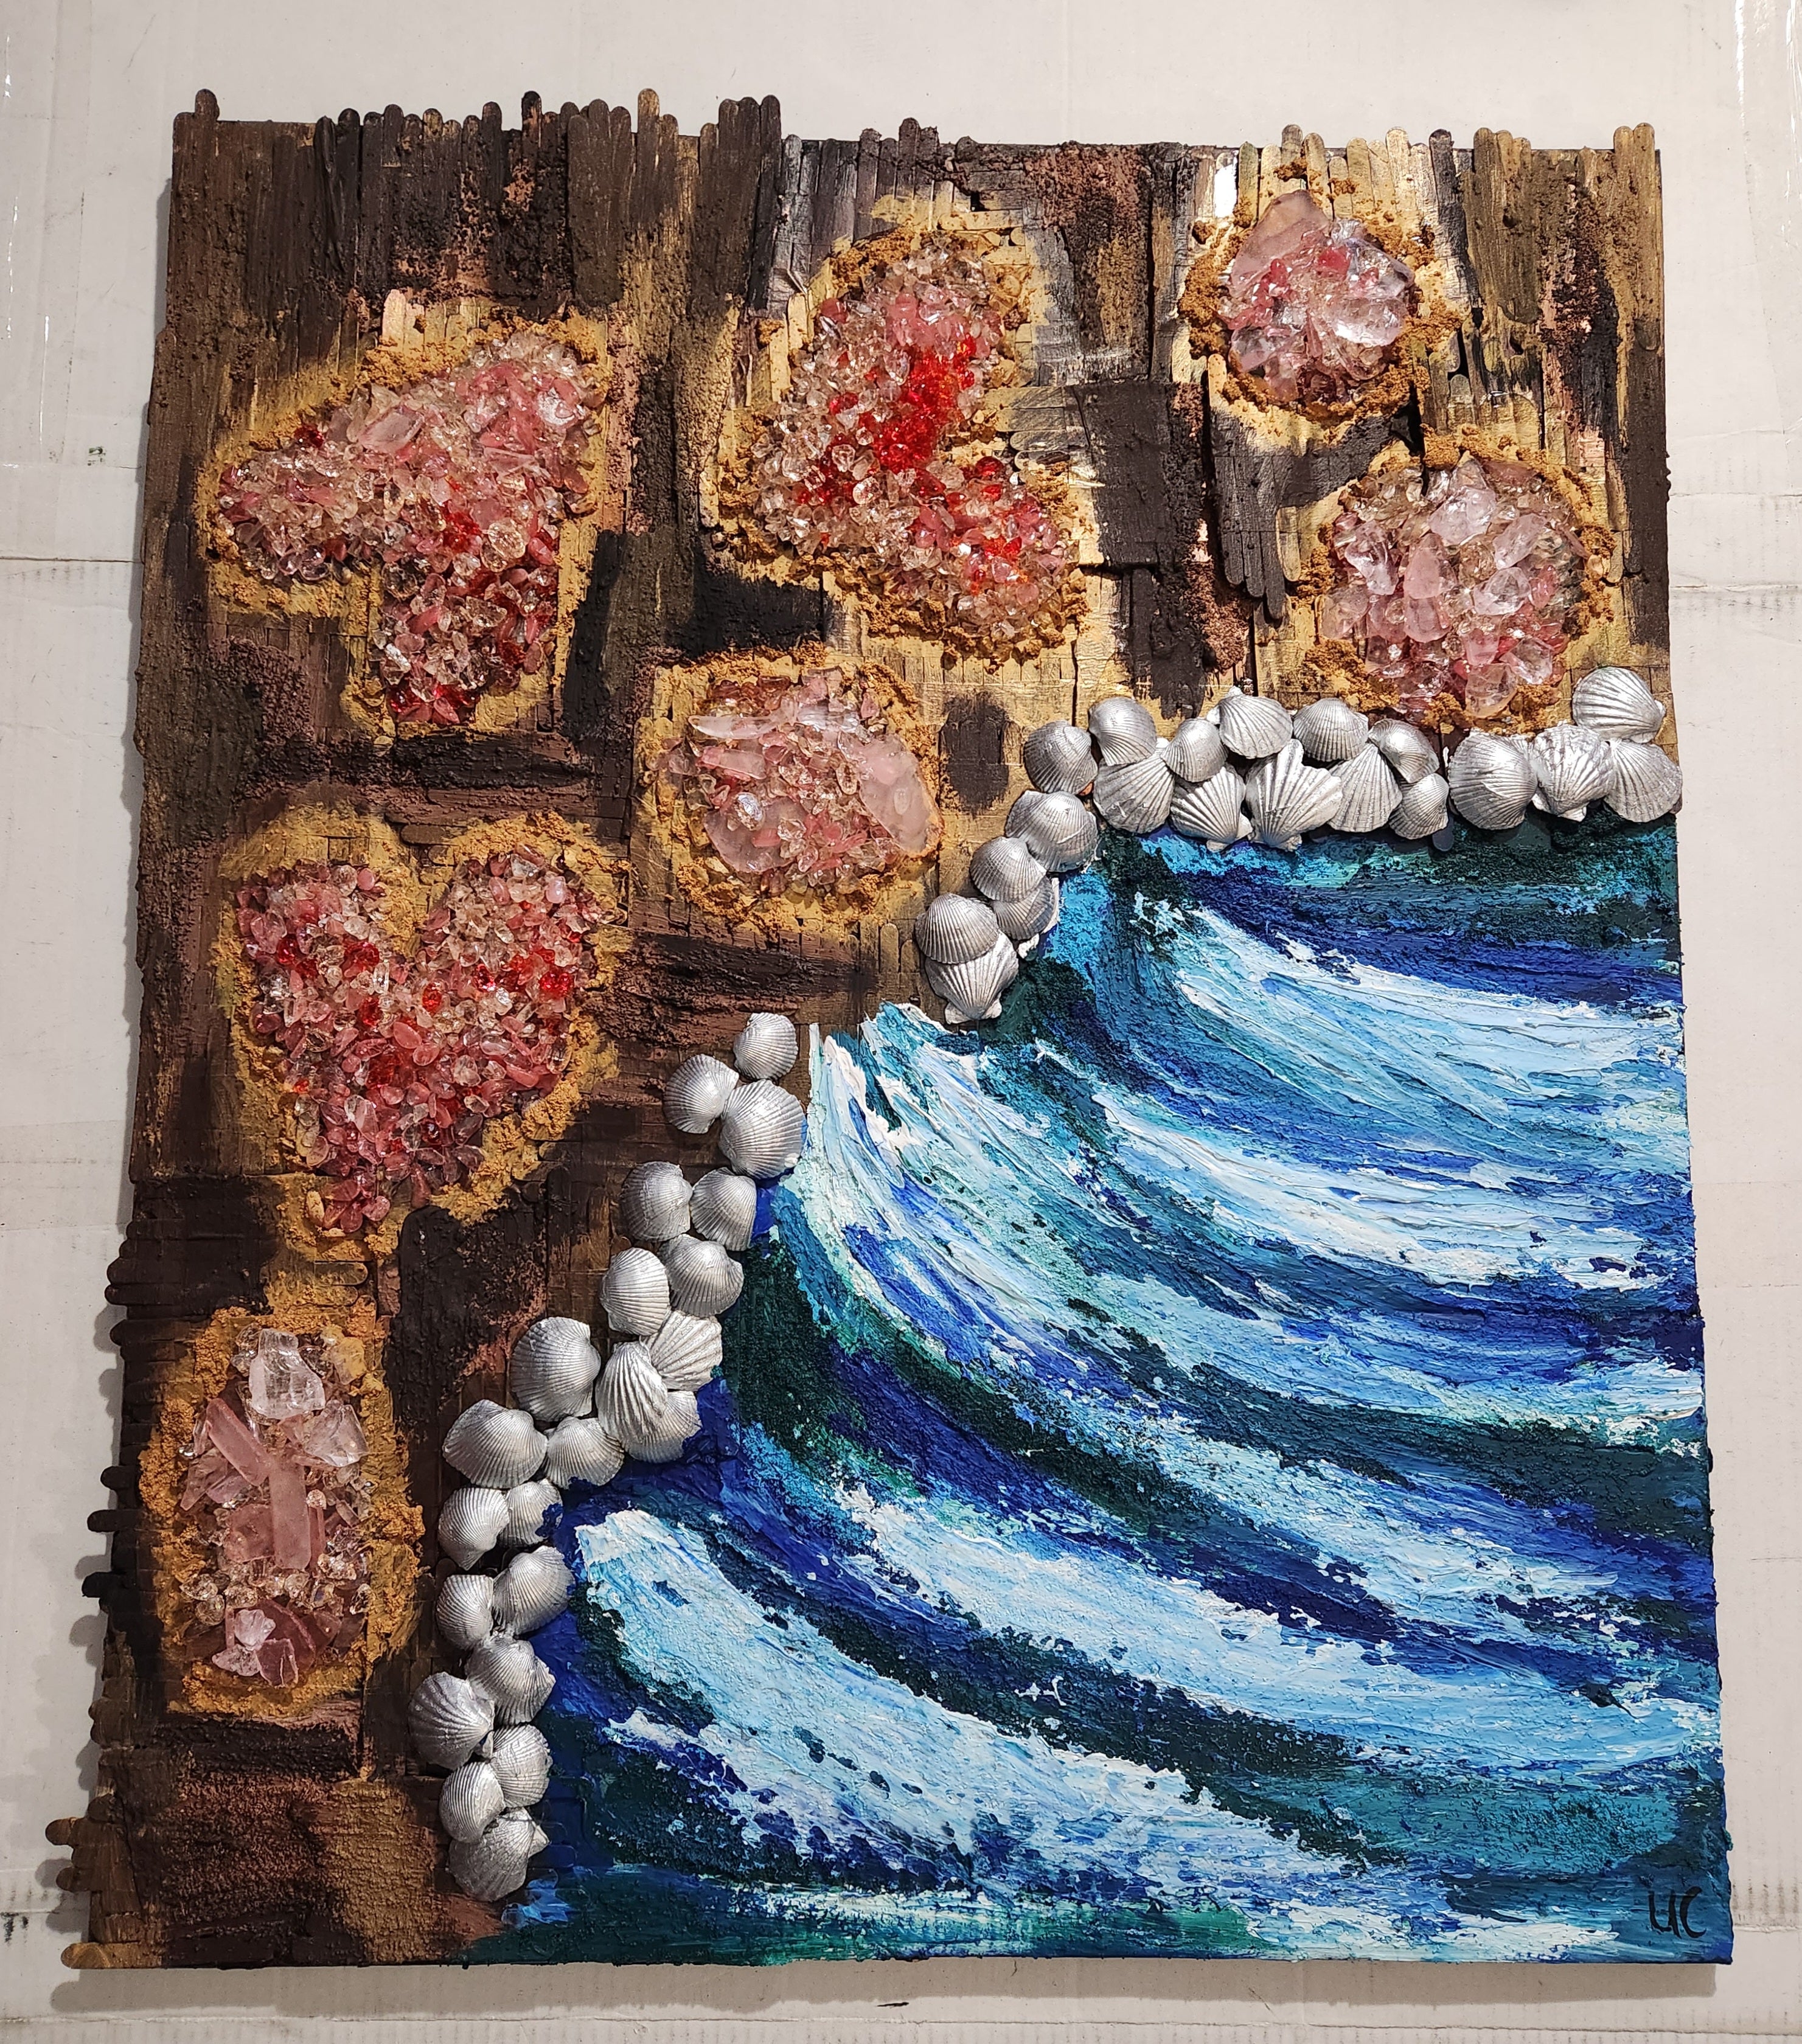 'HEART OF THE SEA'  - Acrylic, Object, and Mixed Media on Canvas